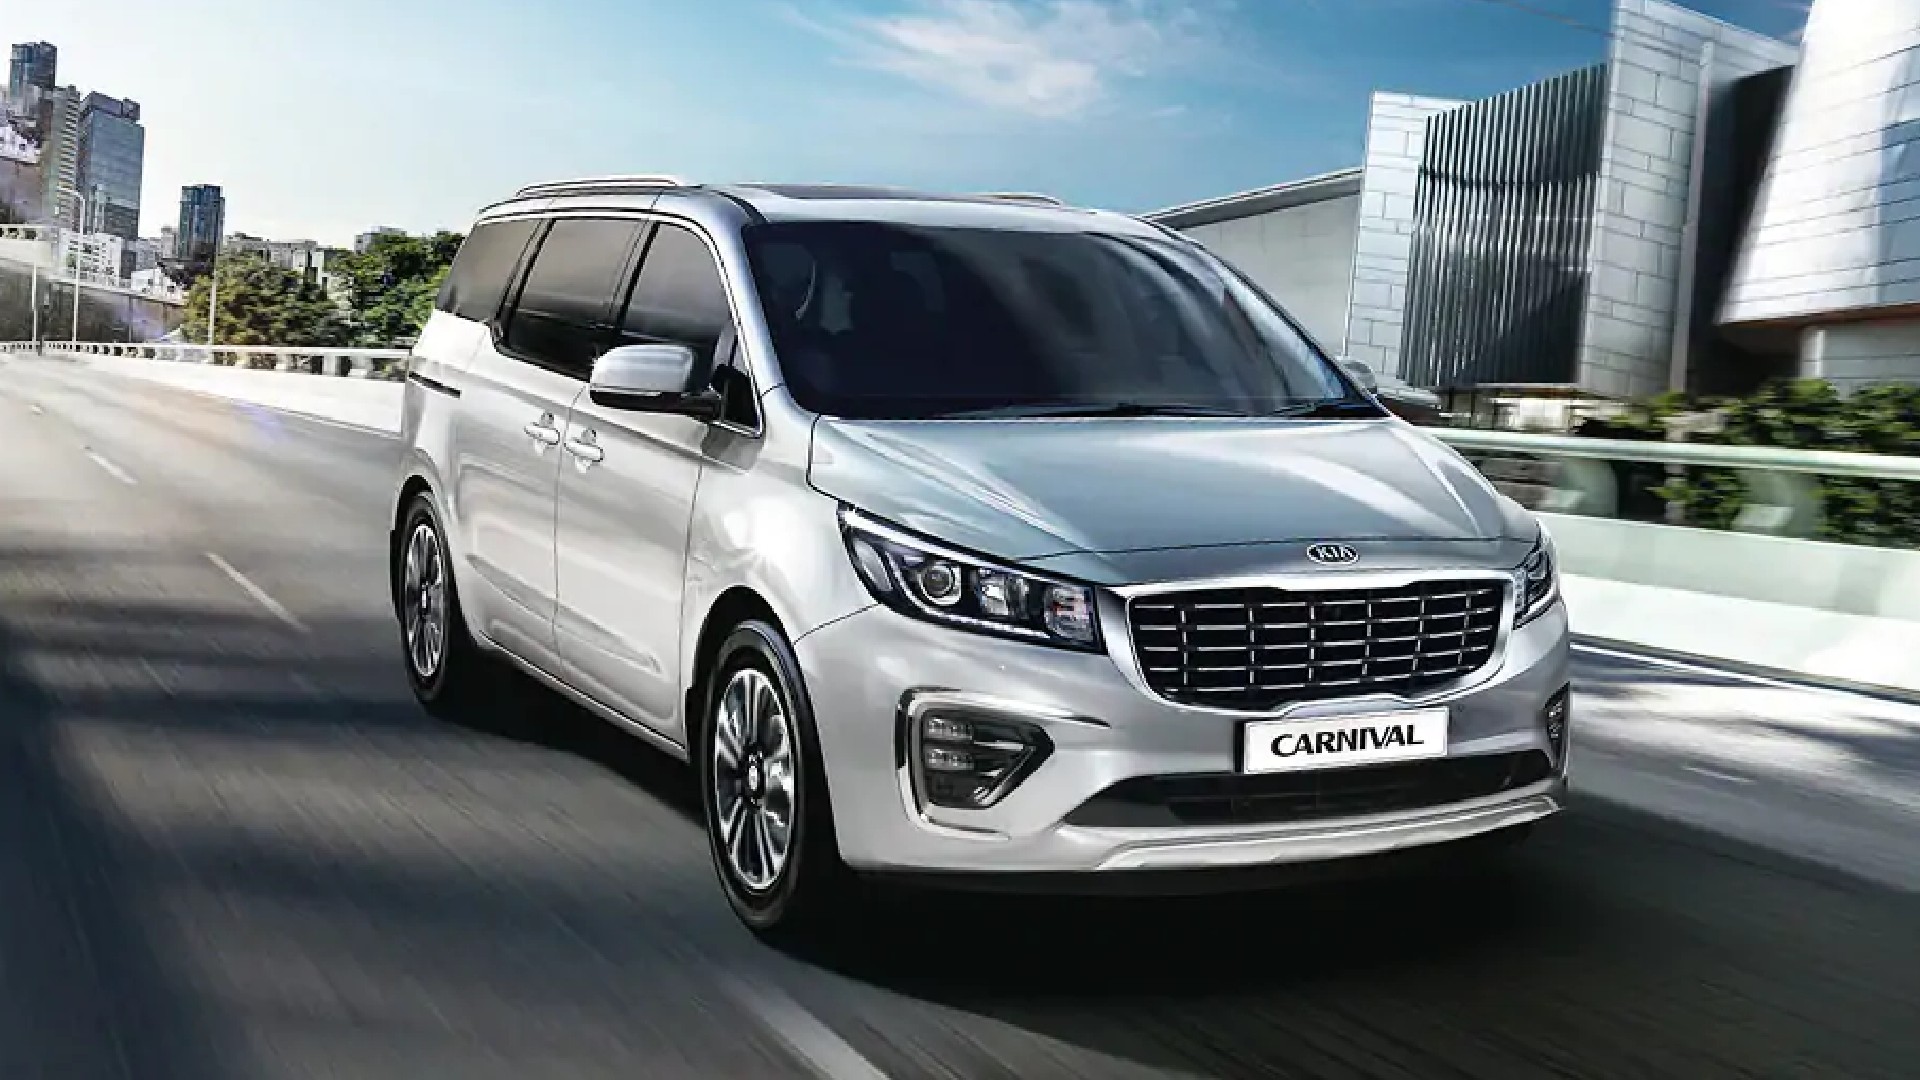 Rewrite 100   Return The Kia Carnival Within 30 Days If You Aren’t Happy